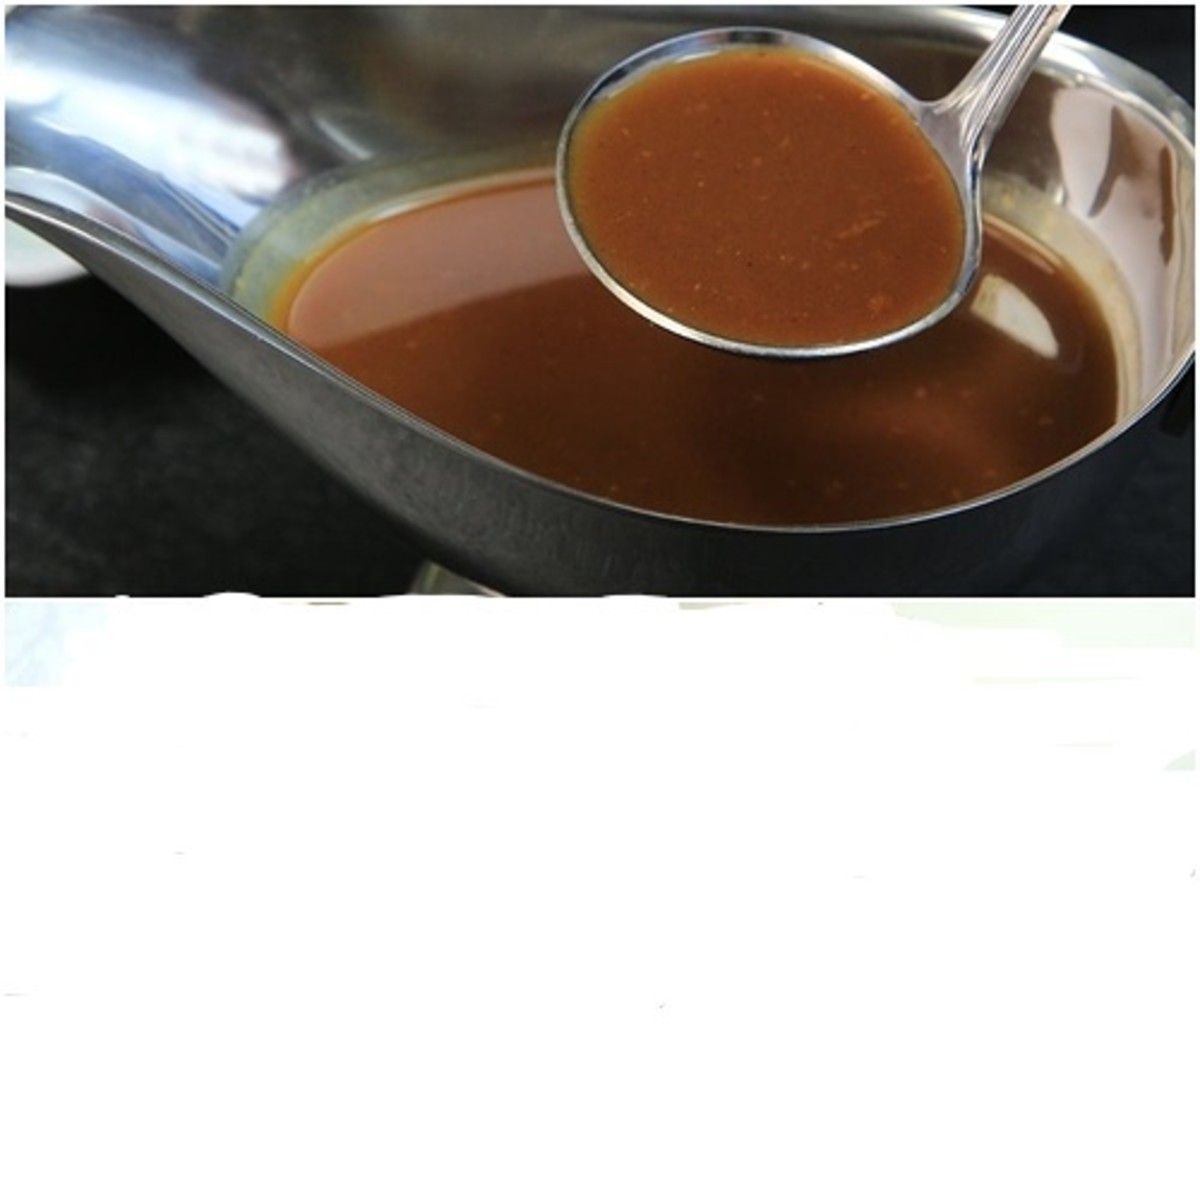  Remember pan sauce is not a gravy it's a sauce, It serves as a enhancer to your leg of lamb, Try and enjoy 